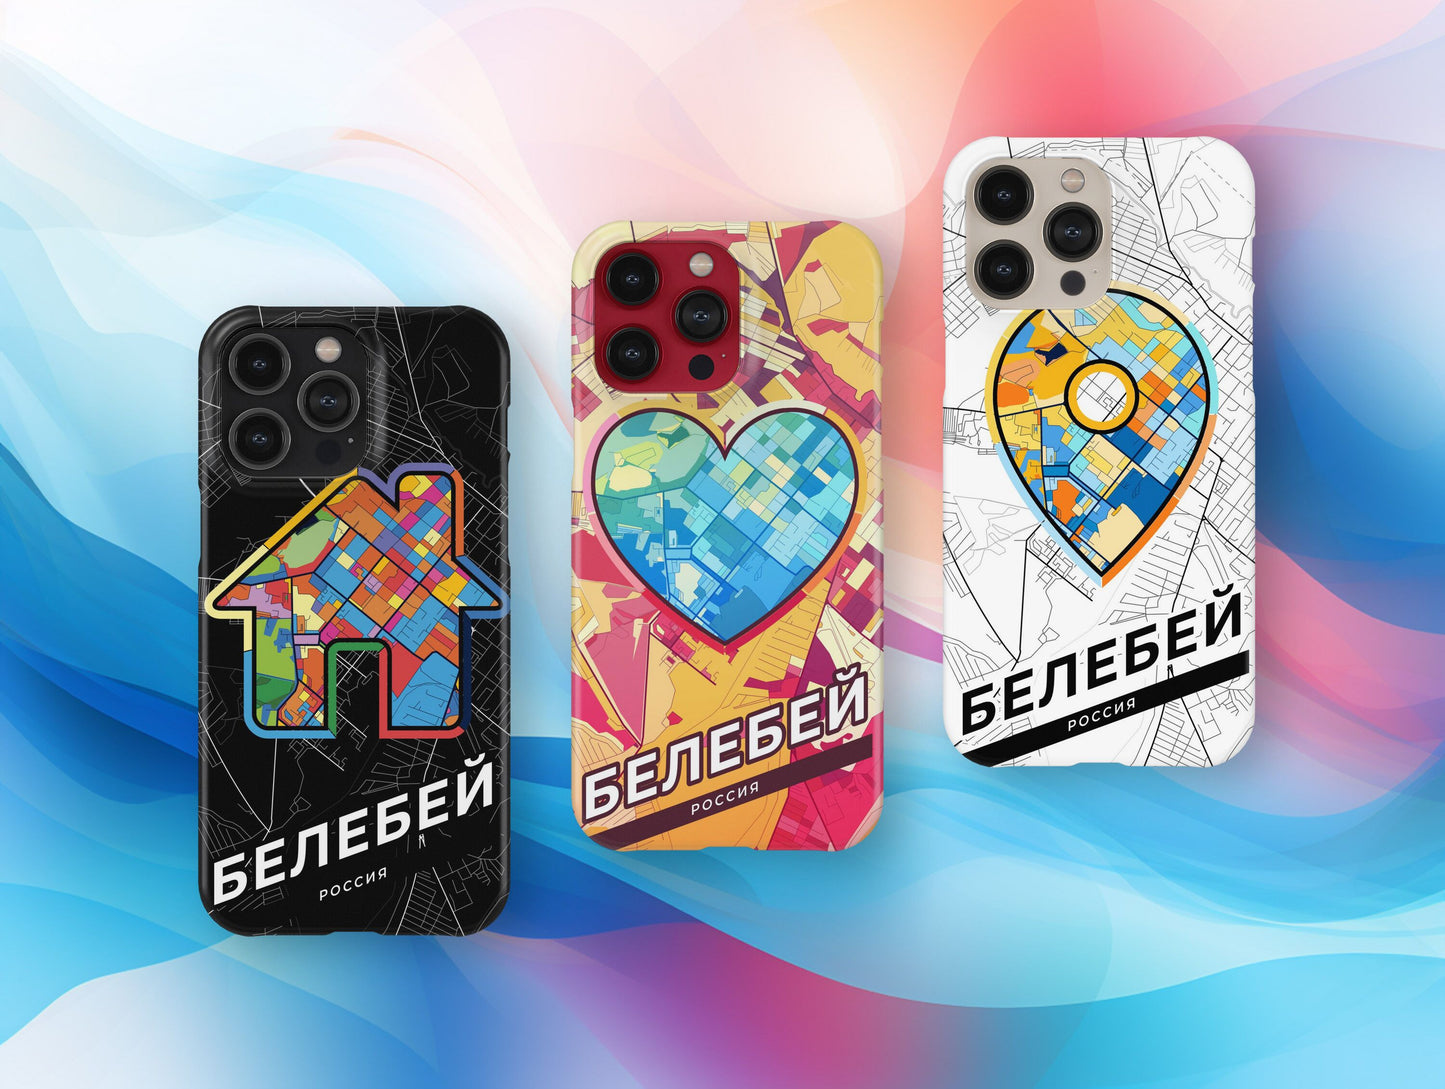 Belebey Russia slim phone case with colorful icon. Birthday, wedding or housewarming gift. Couple match cases.